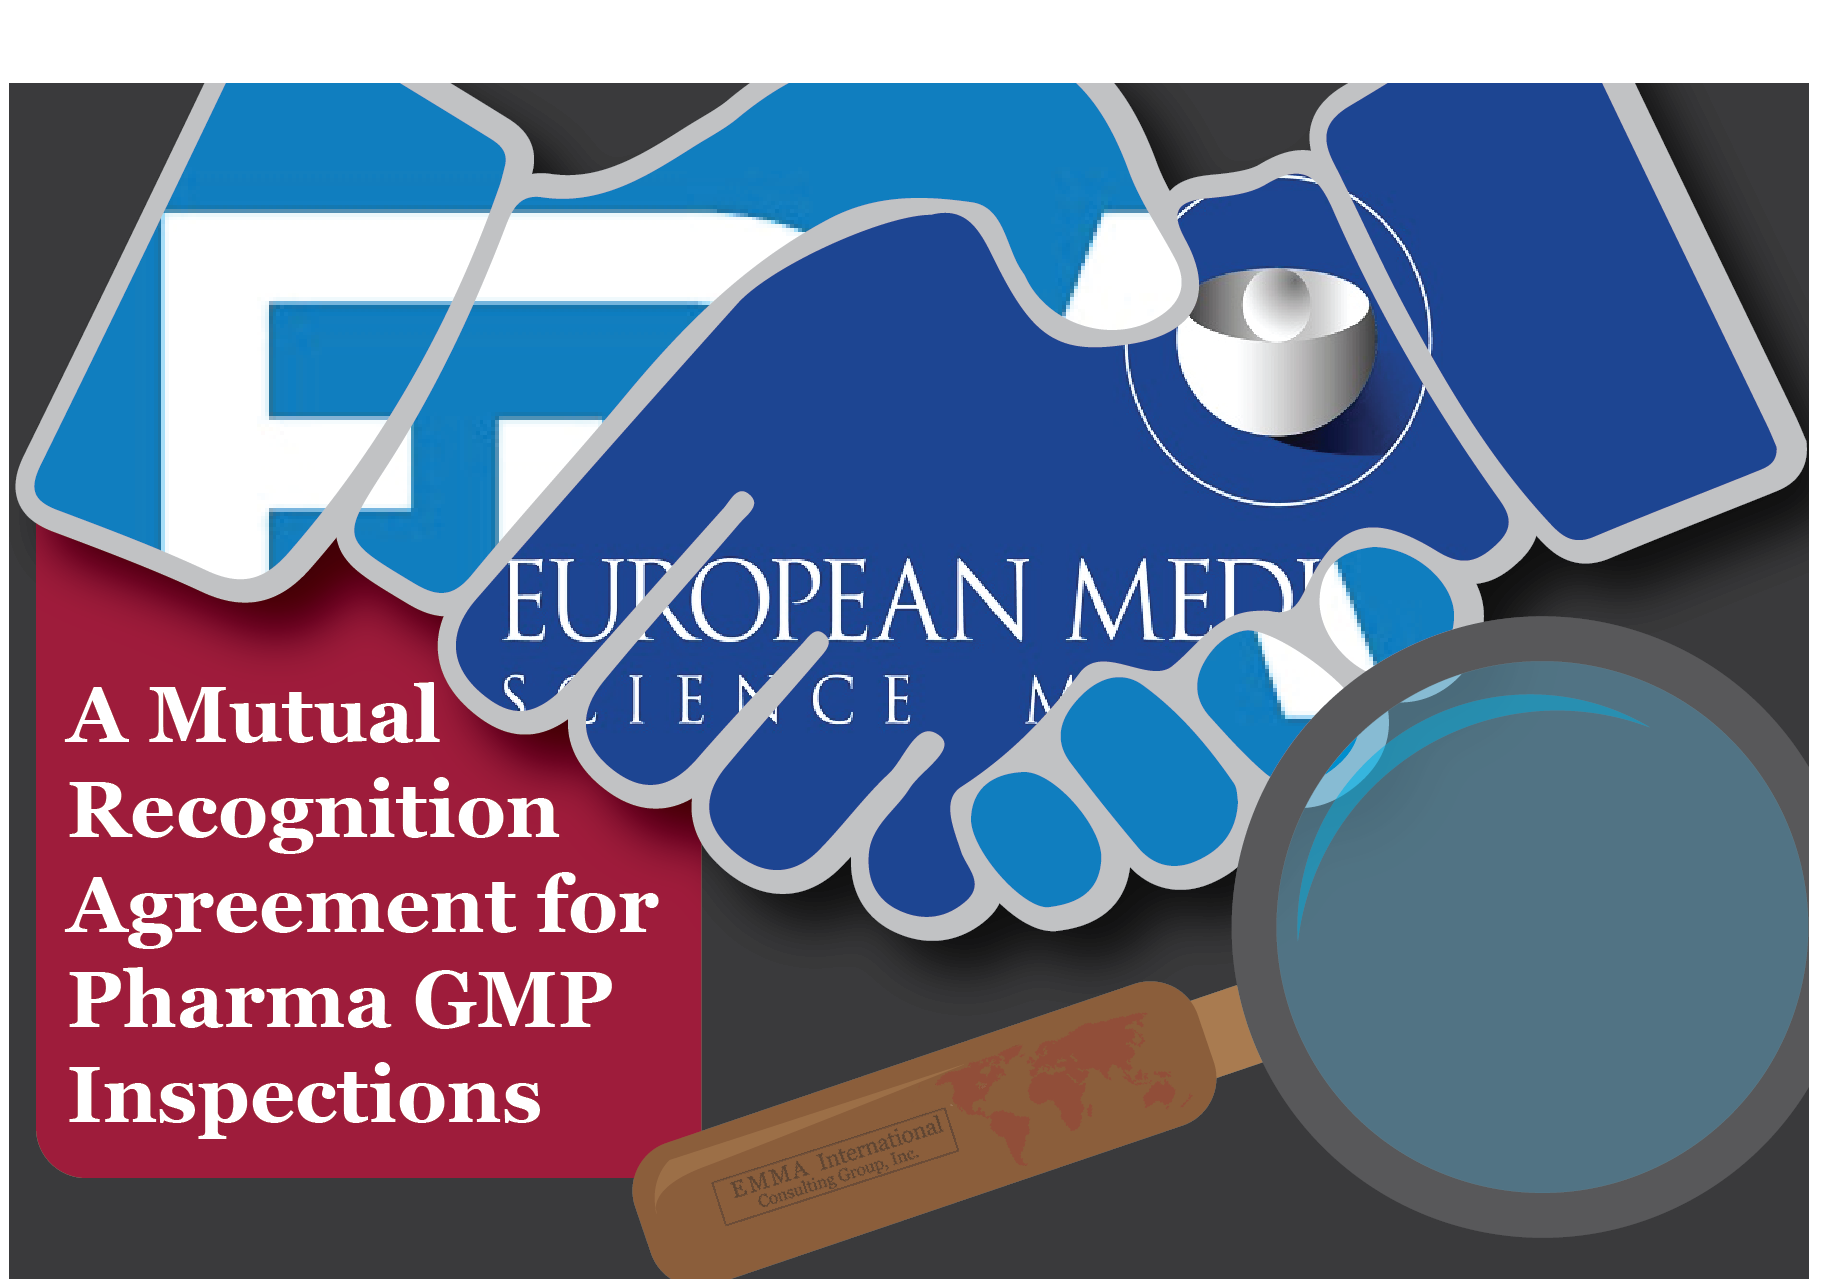 A Mutual Recognition Agreement for Pharma GMP Inspections